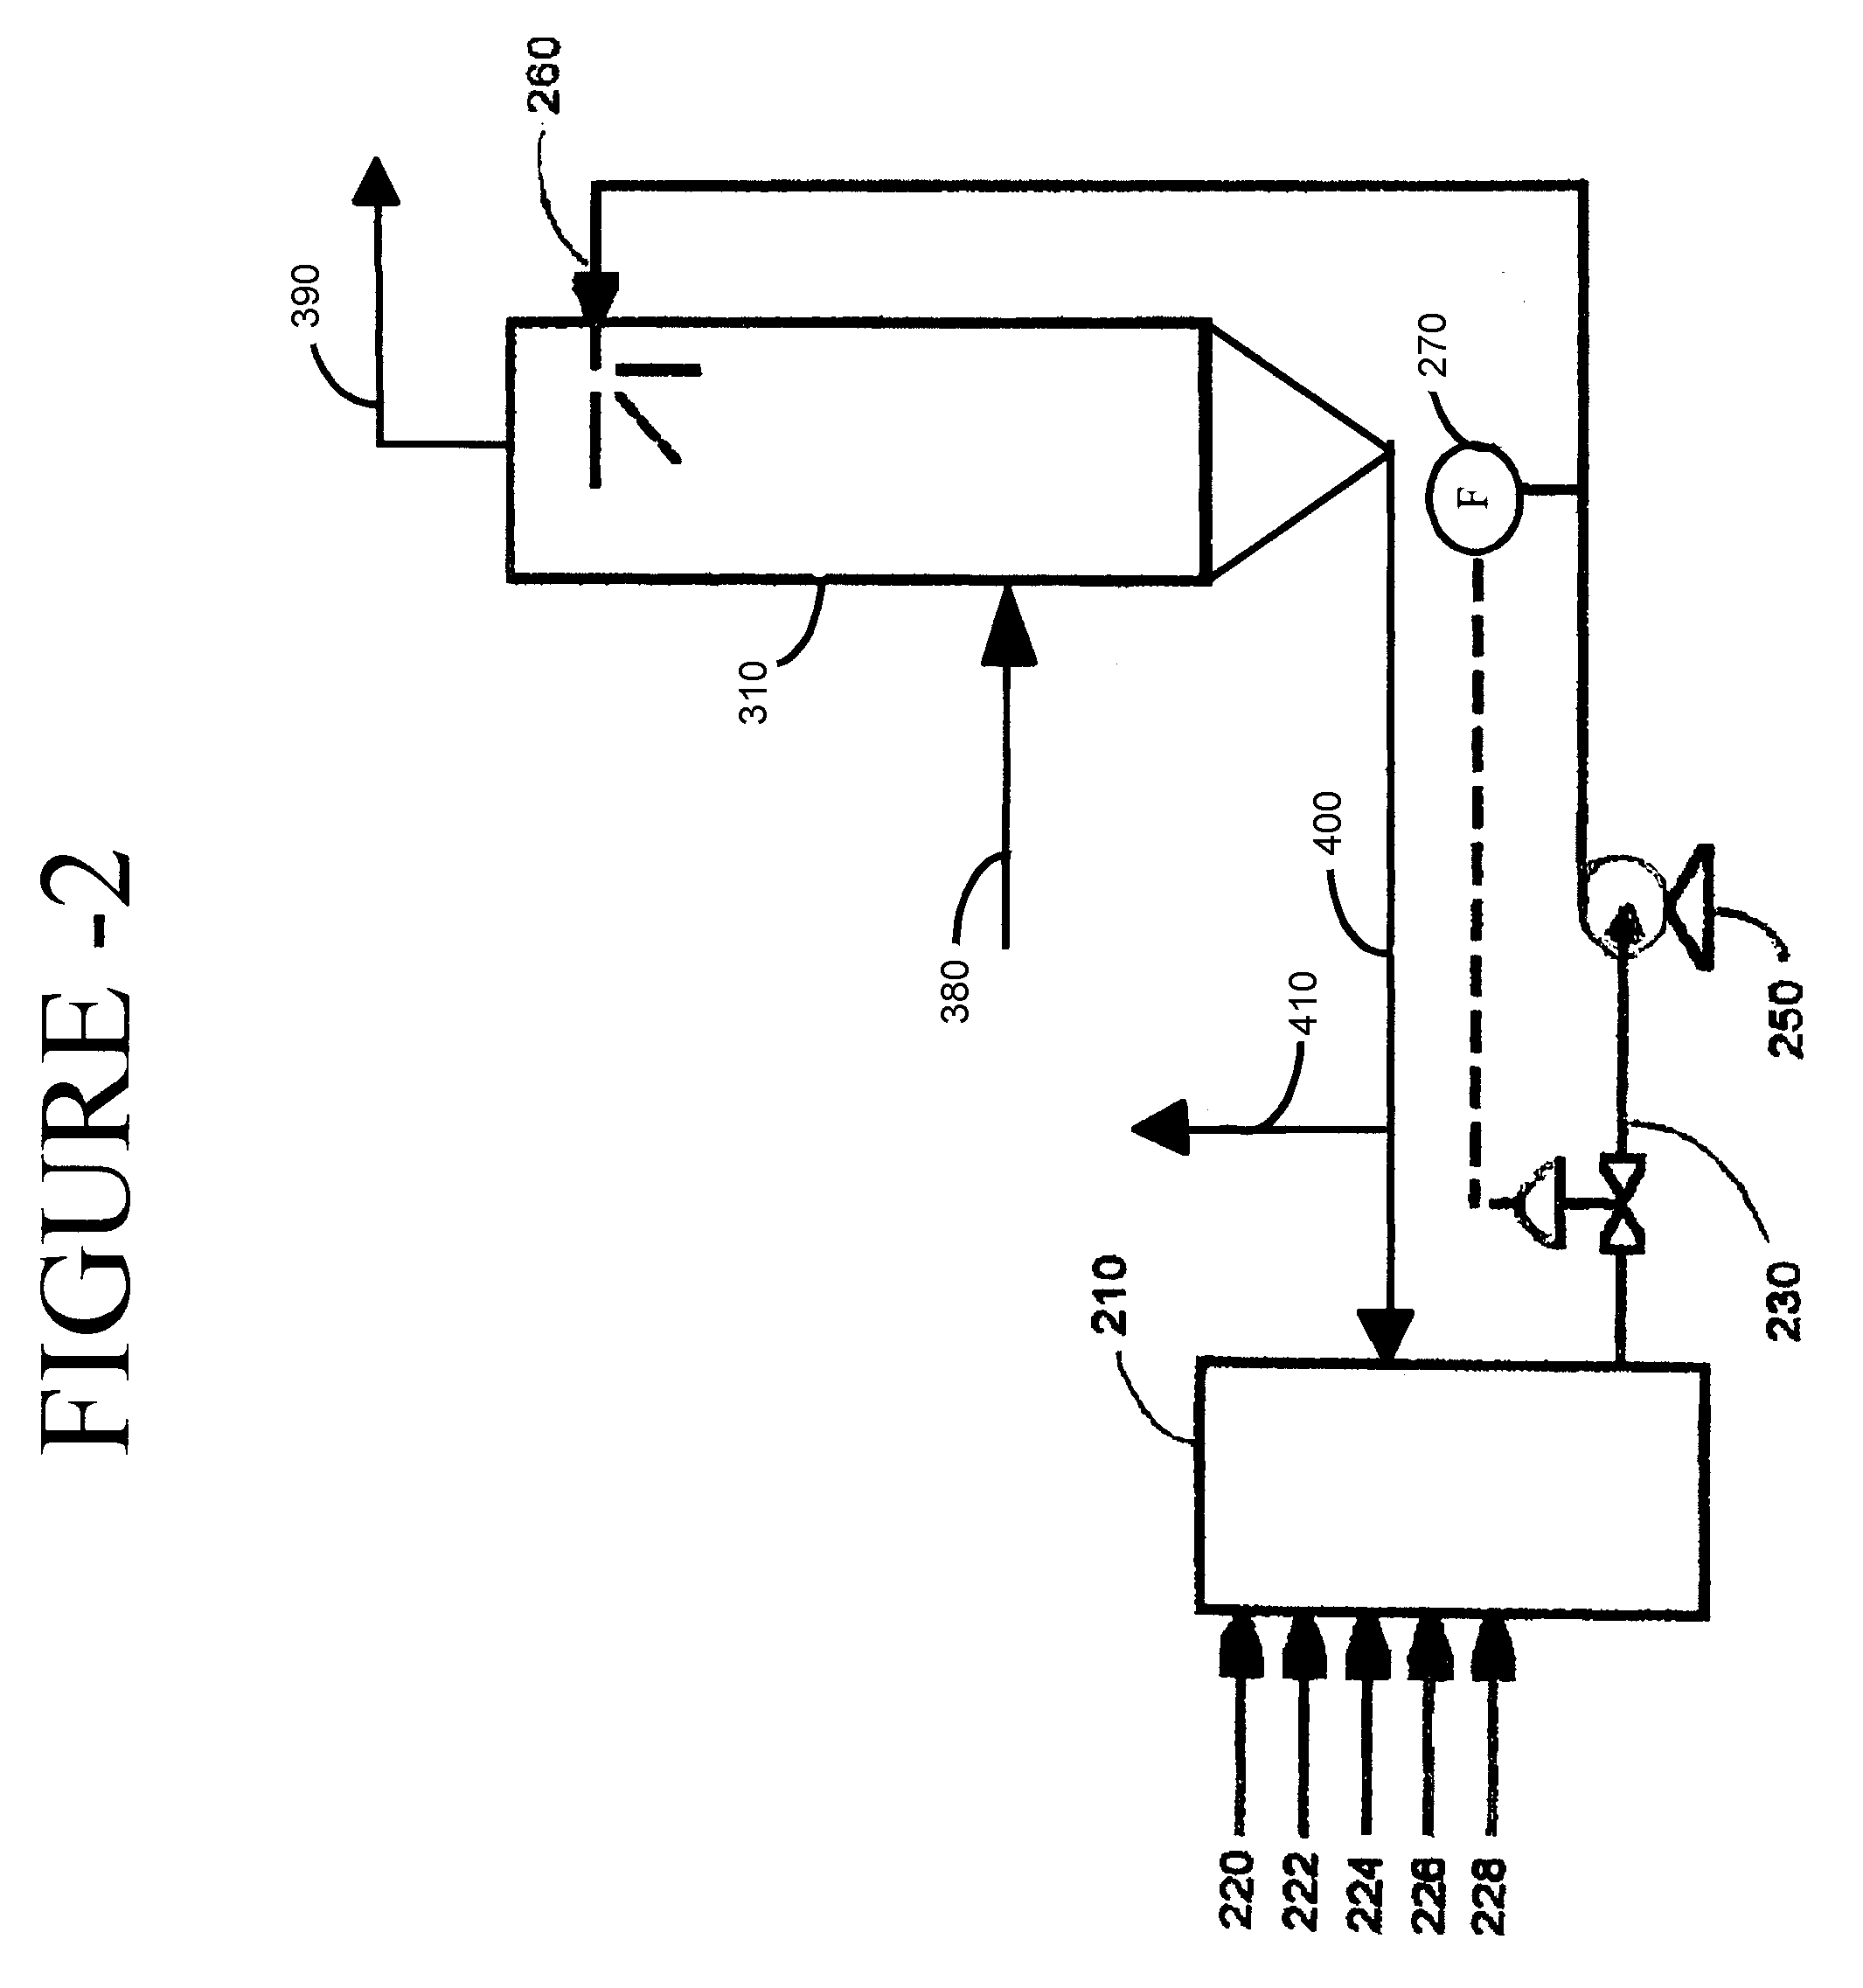 Addition of a reactor process to a coking process